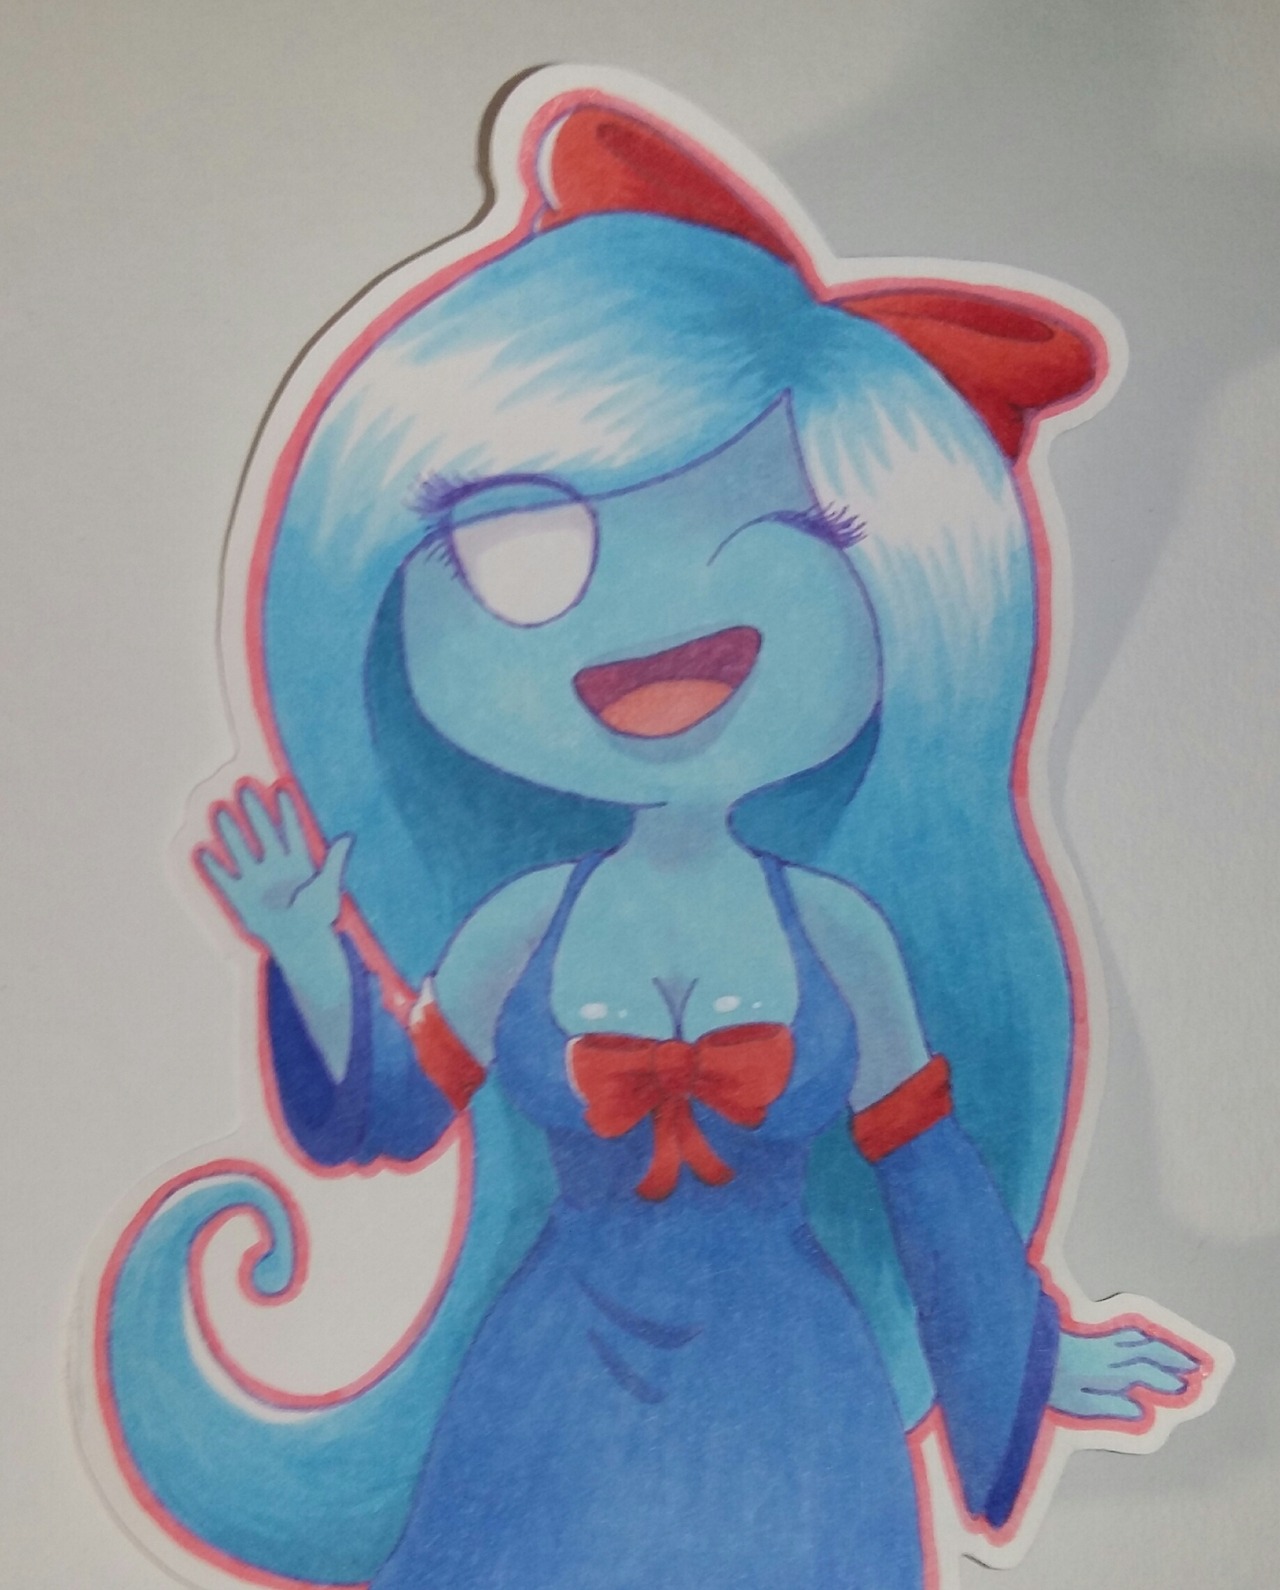 @fionavarts did this amazing drawing of Abby the Ghost for me at FanExpo Vancouver!